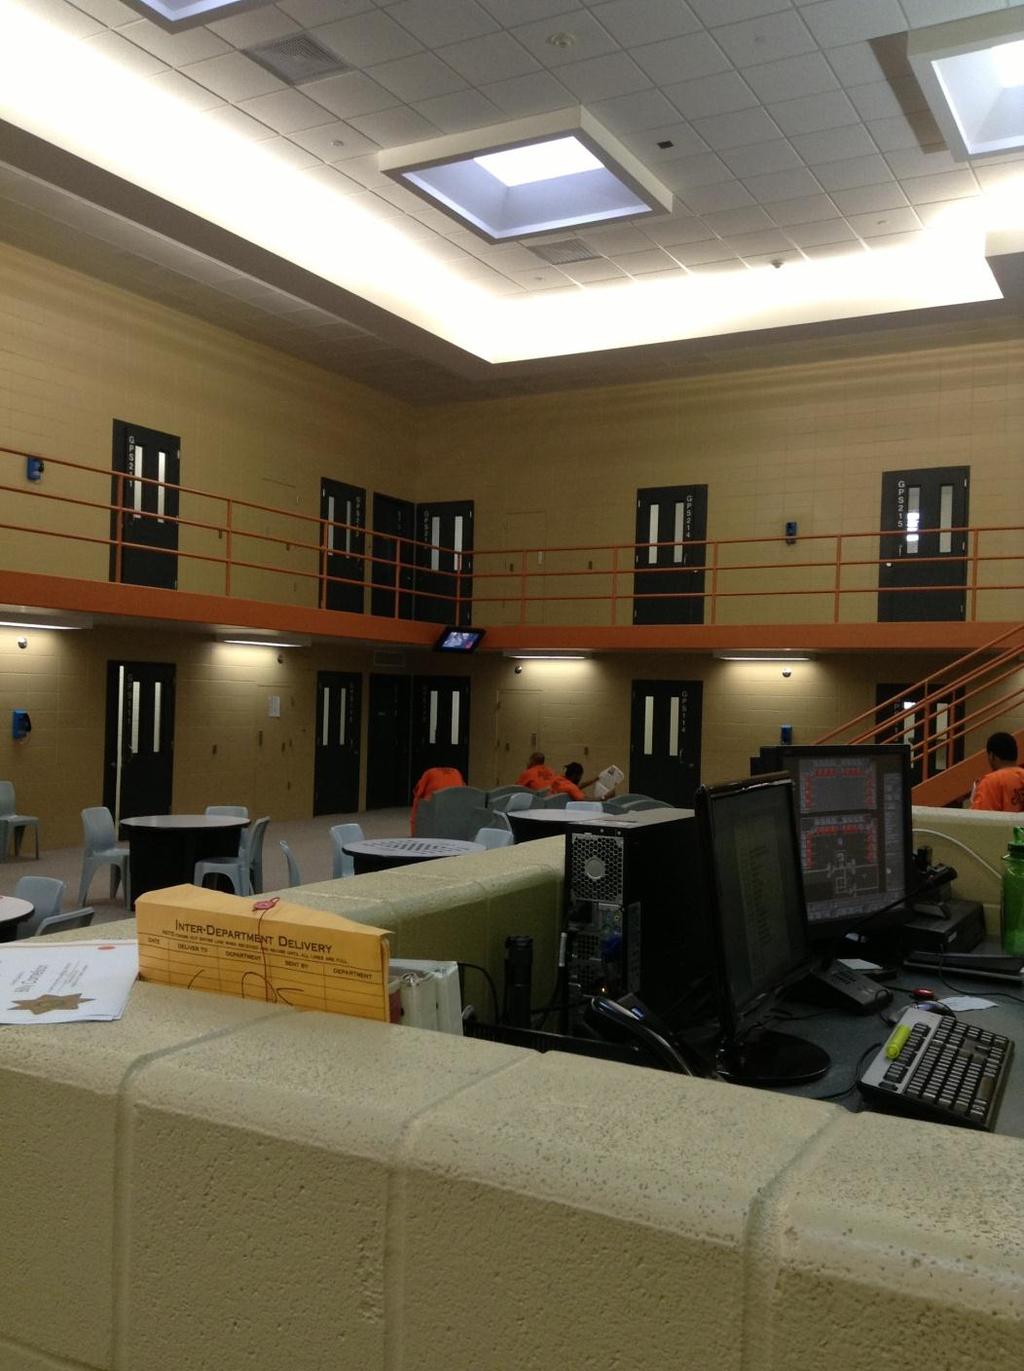 Overview The jail can house up to 354 inmates.